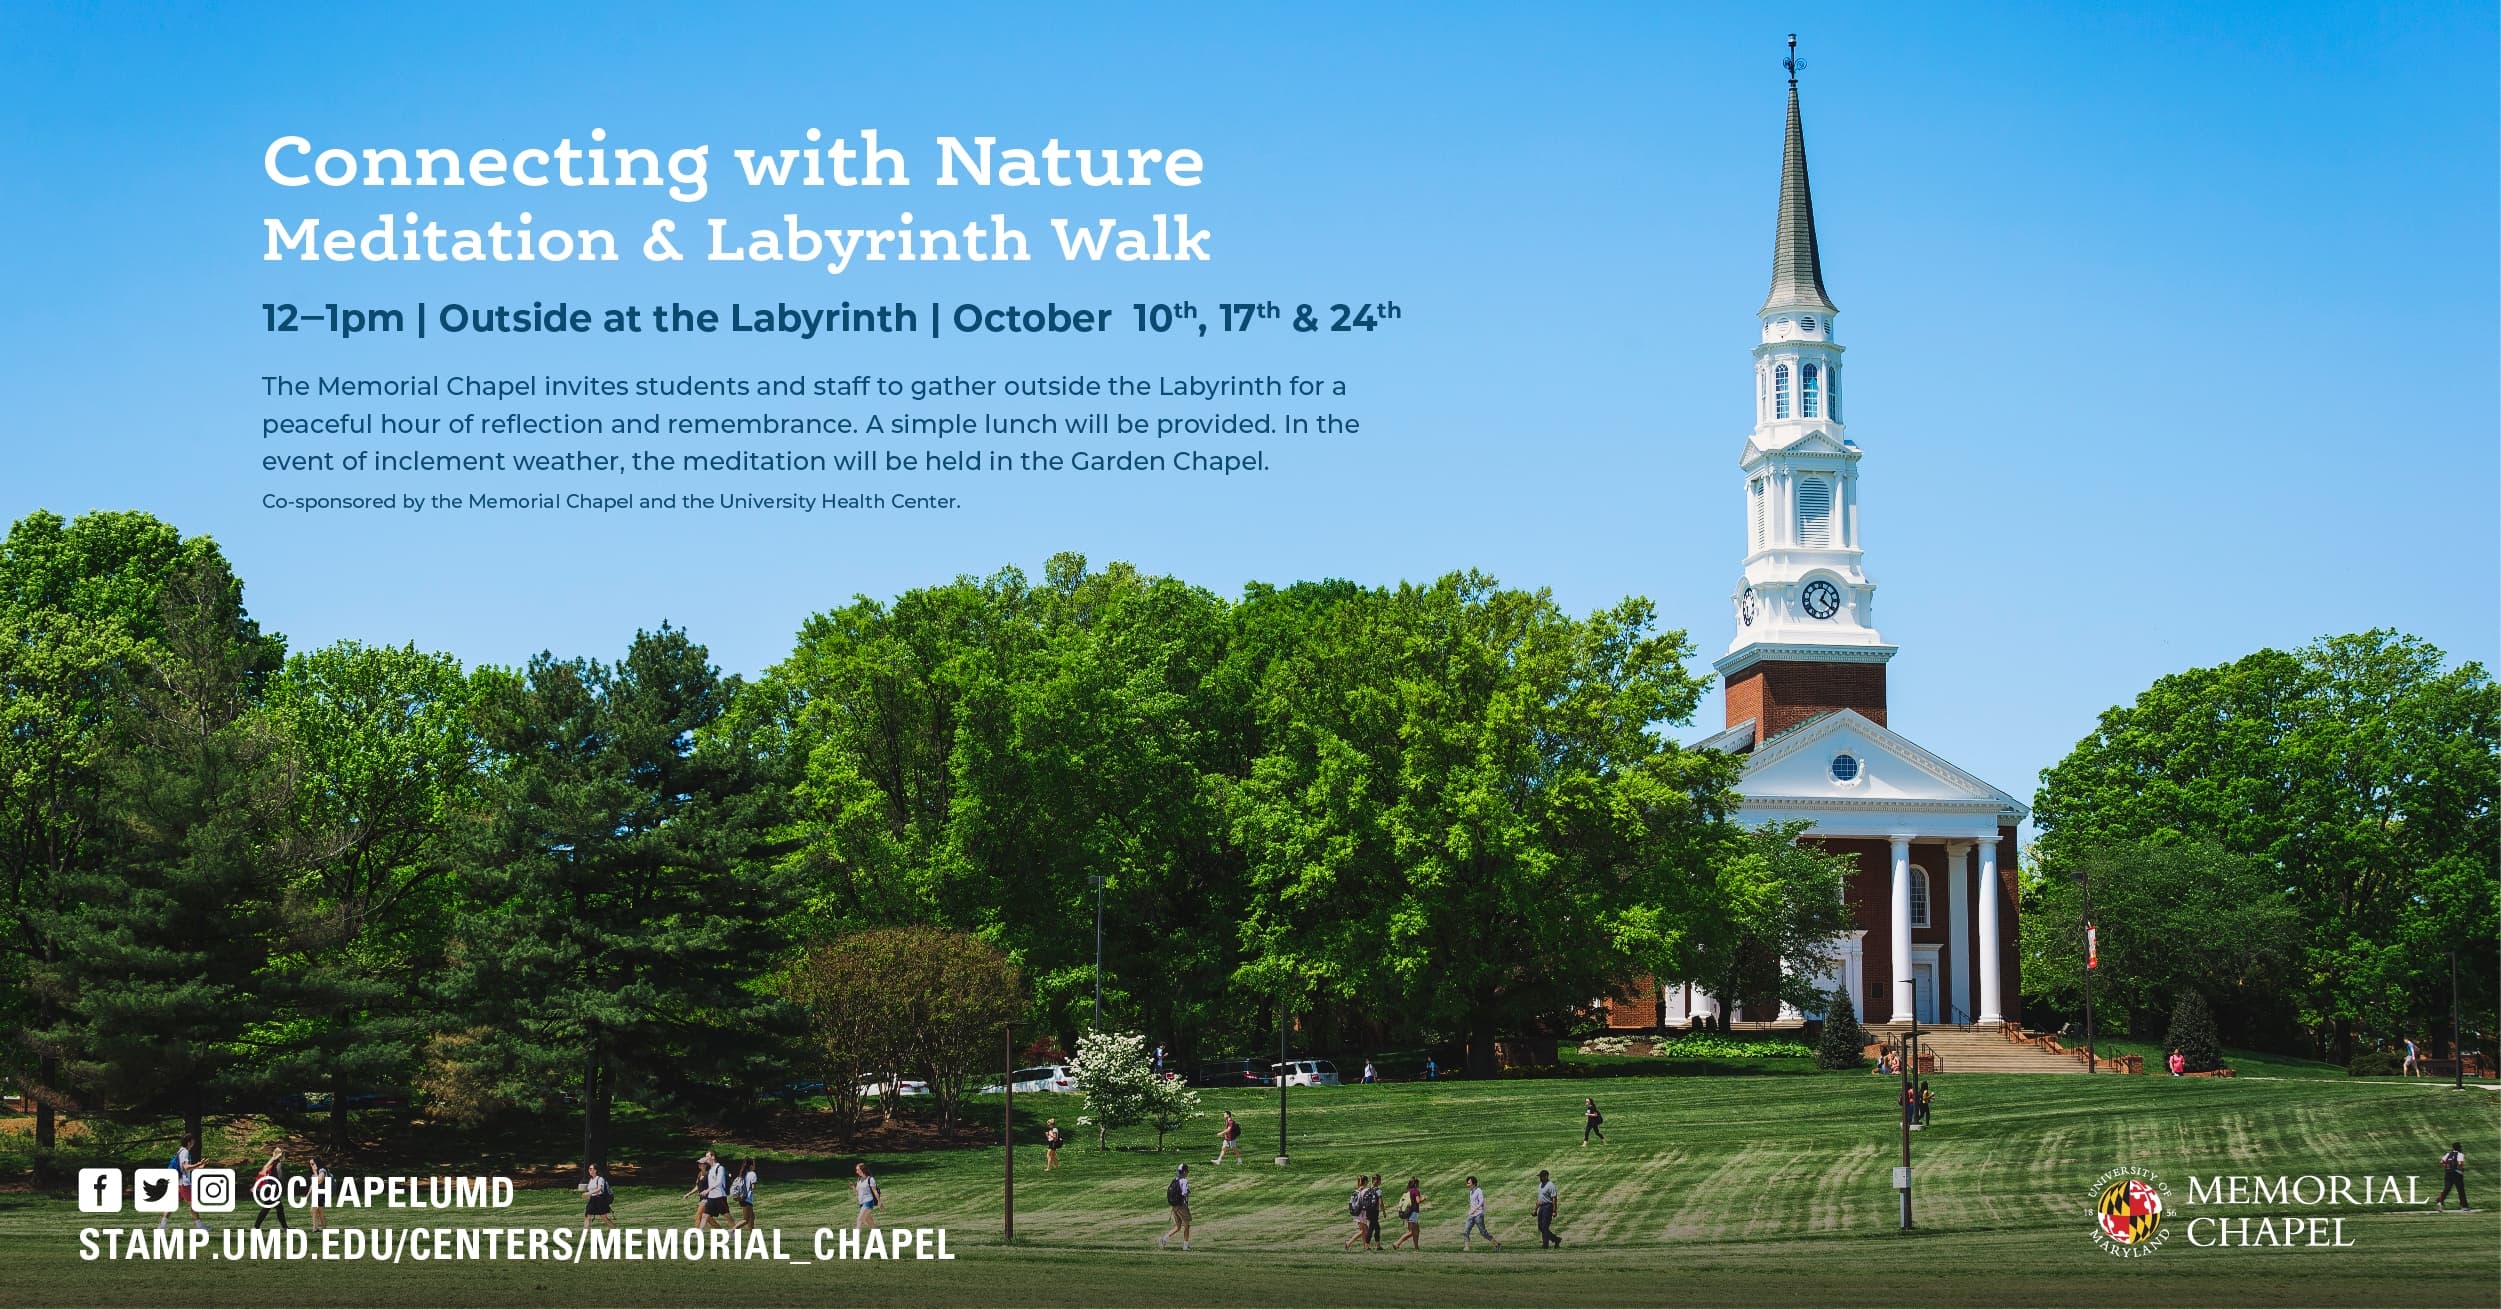 Photograph of the Memorial Chapel with lush green trees, and event details as text on the image.